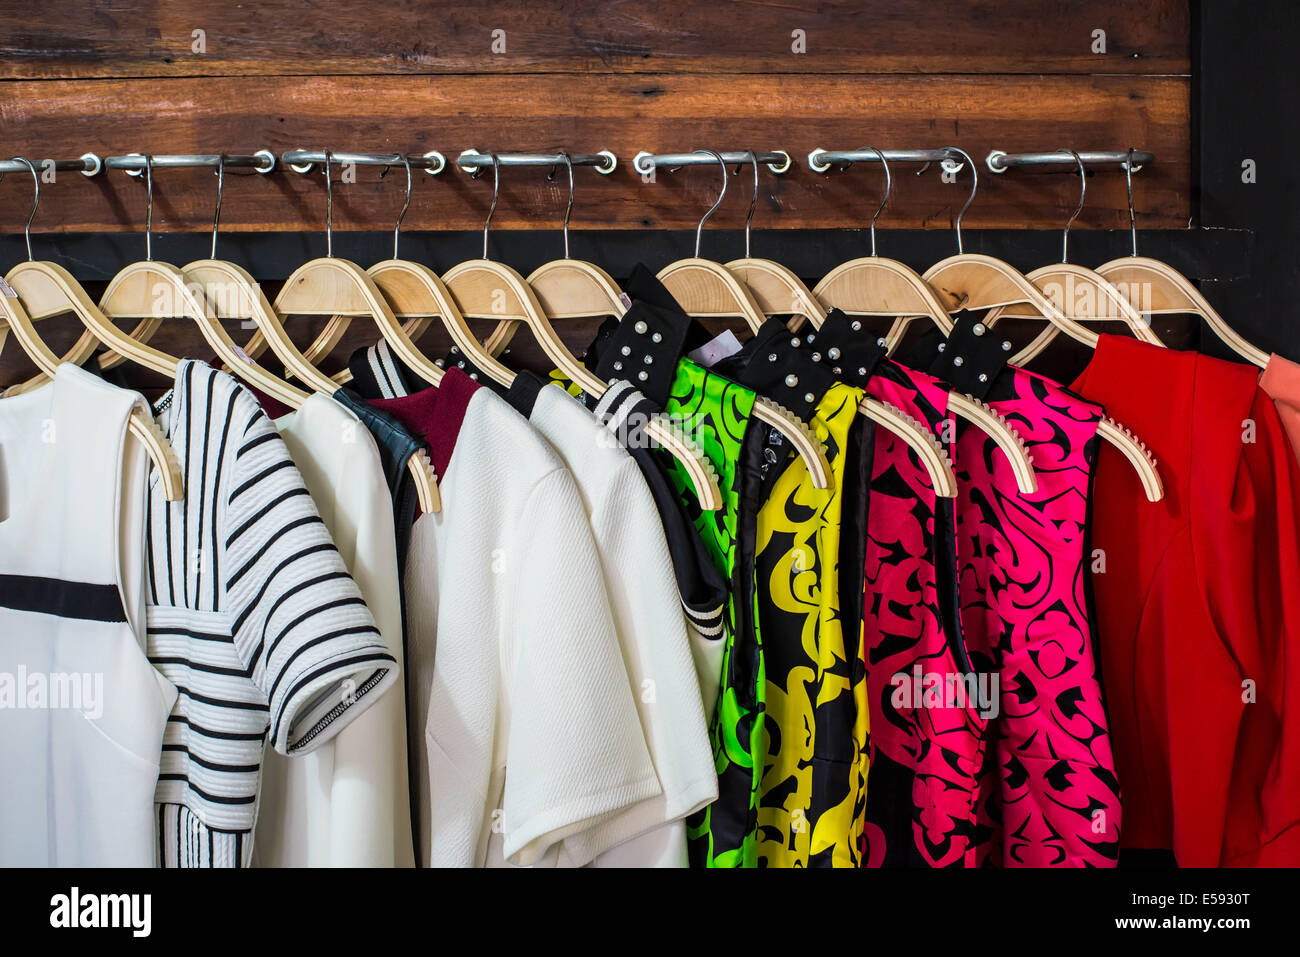 Many blouses on hangers in the dressing room. Stock Photo